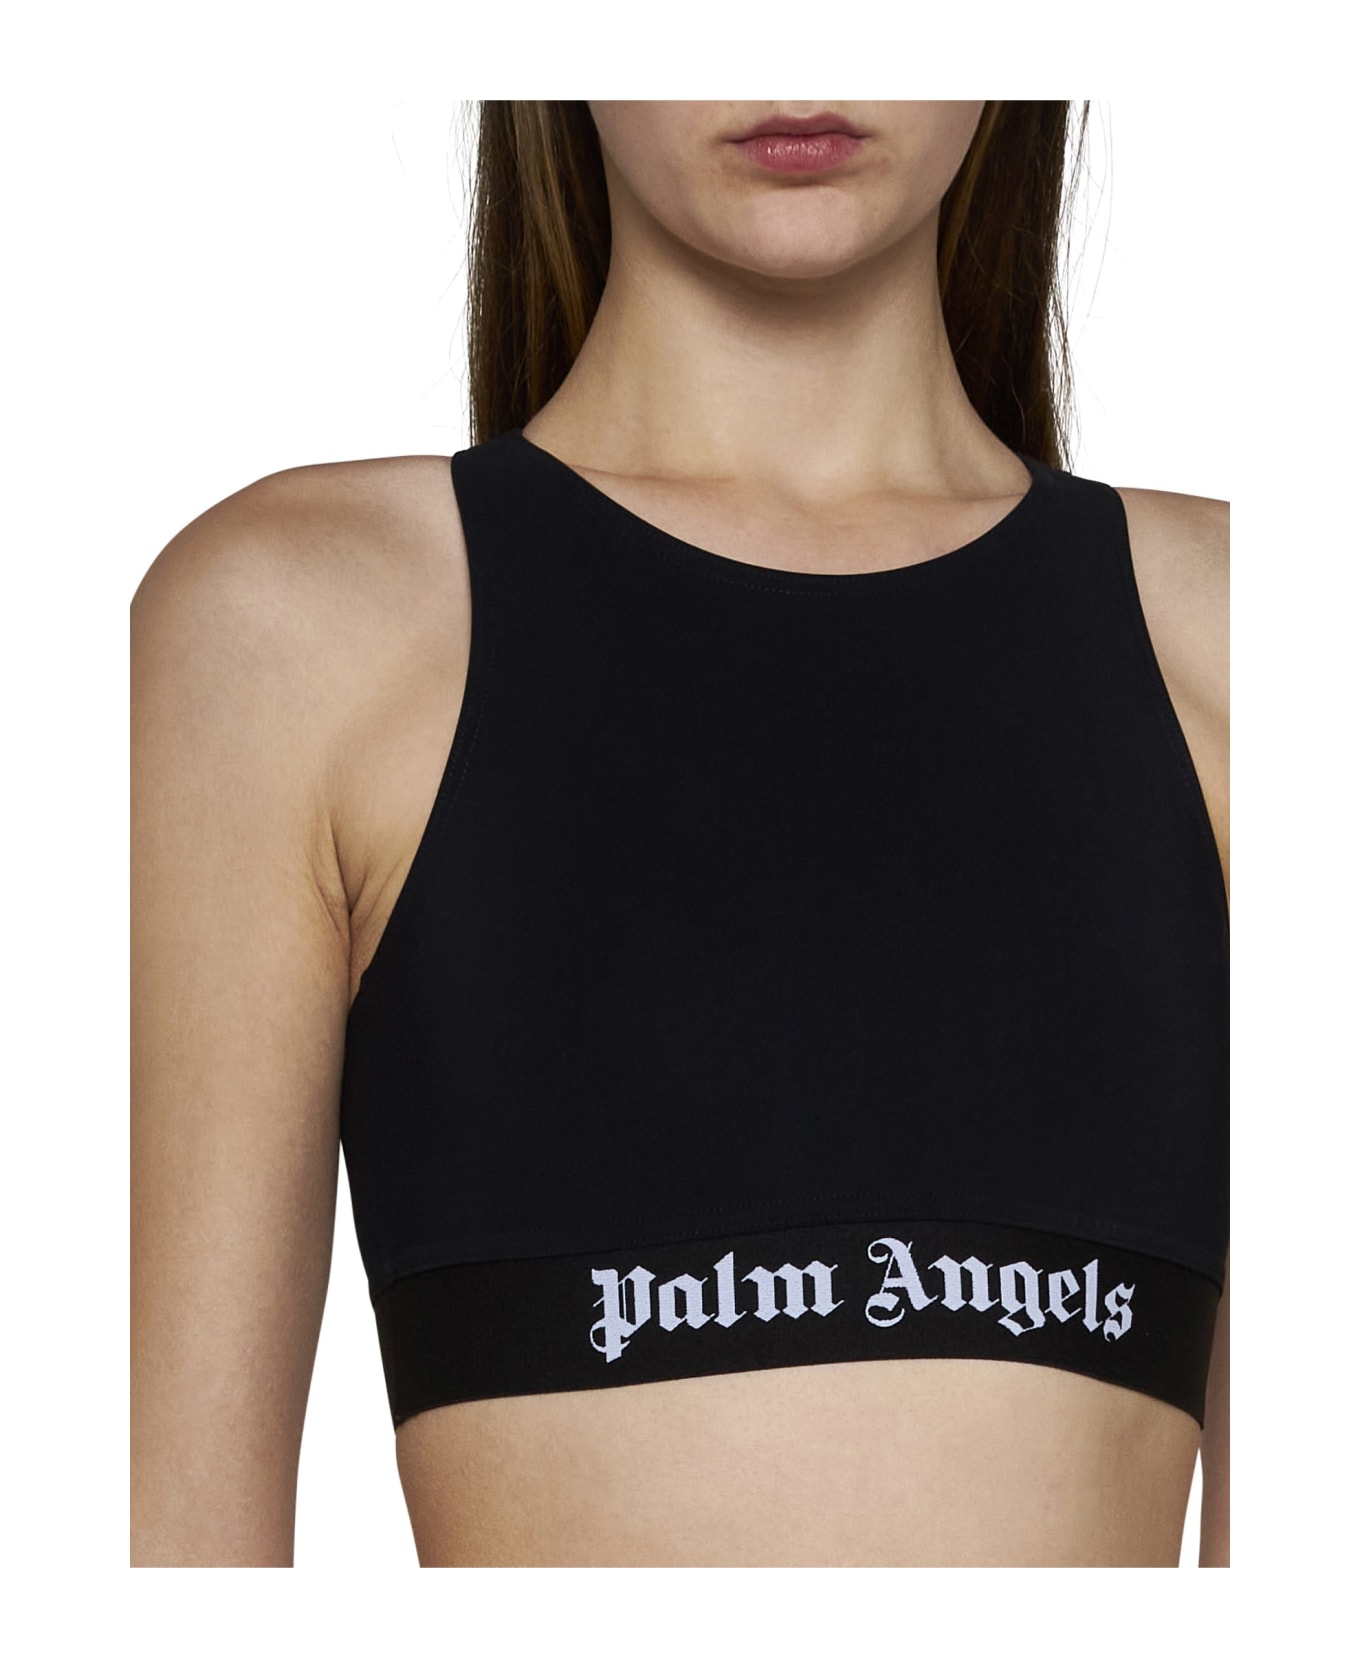 Palm Angels Technical Fabric Crop Top - black